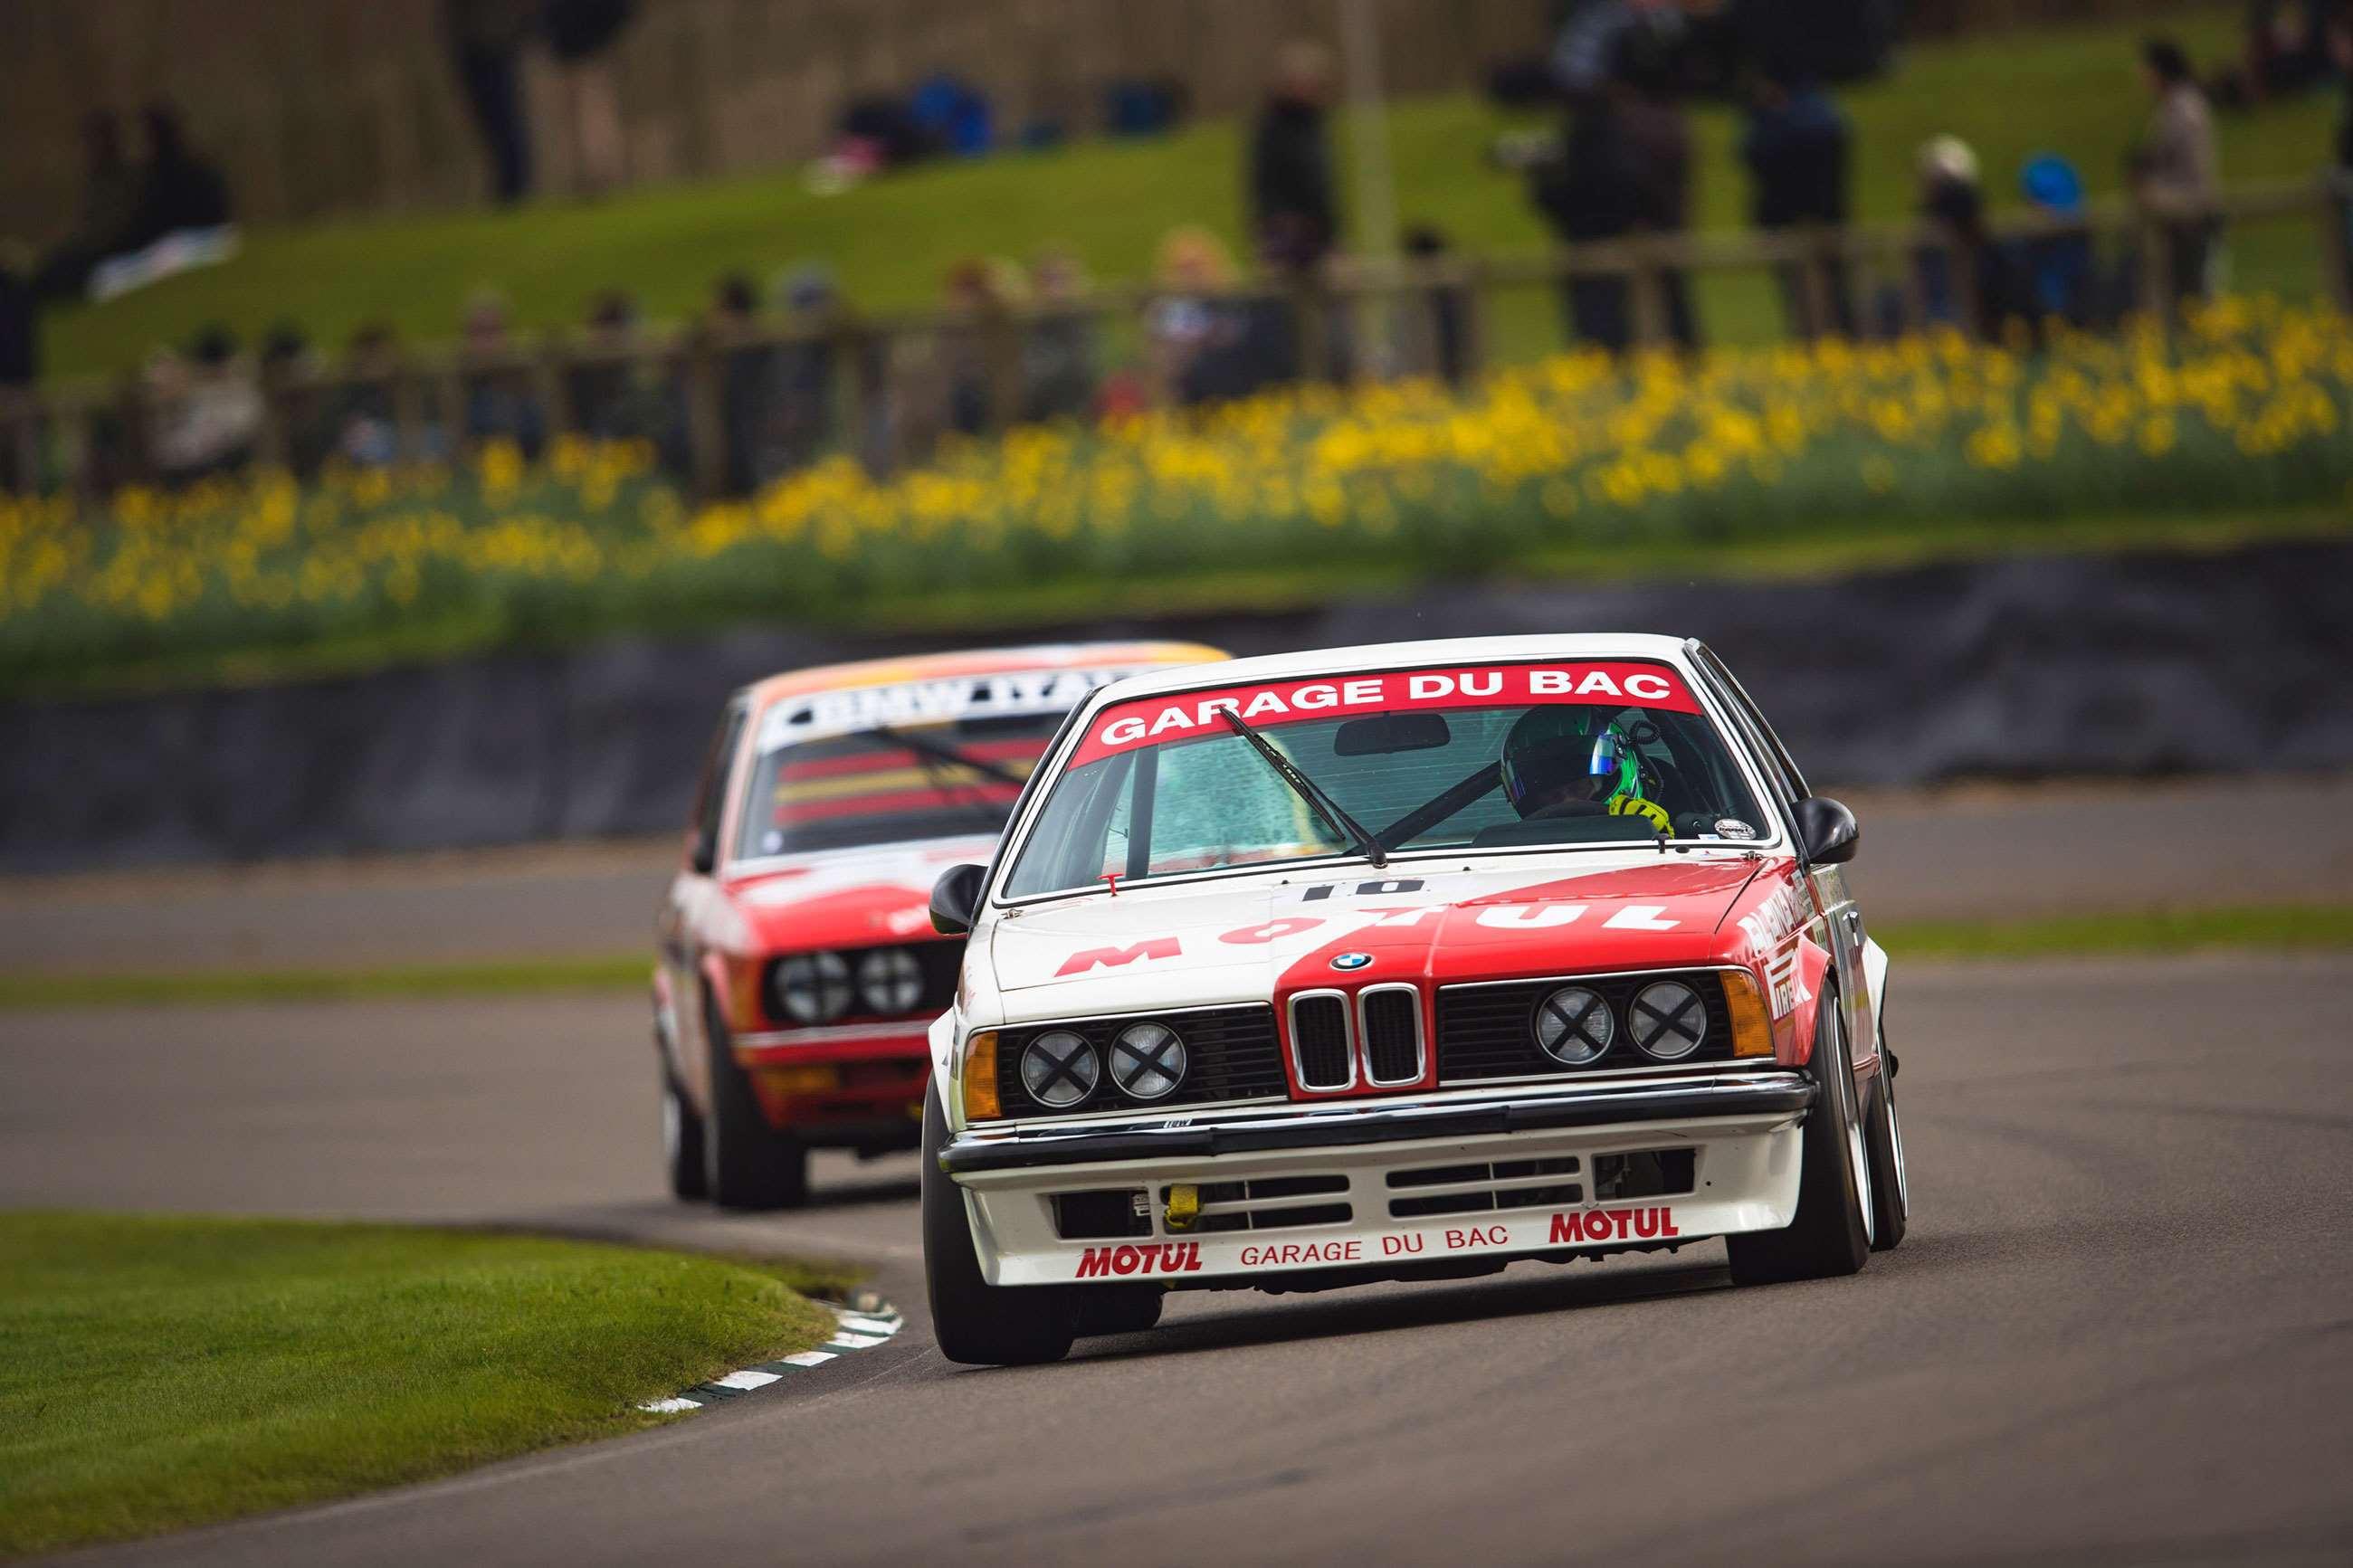 how-to-watch-the-goodwood-78th-members-meeting-bmw-drew-gibson-75-goodwood-11032020.jpg